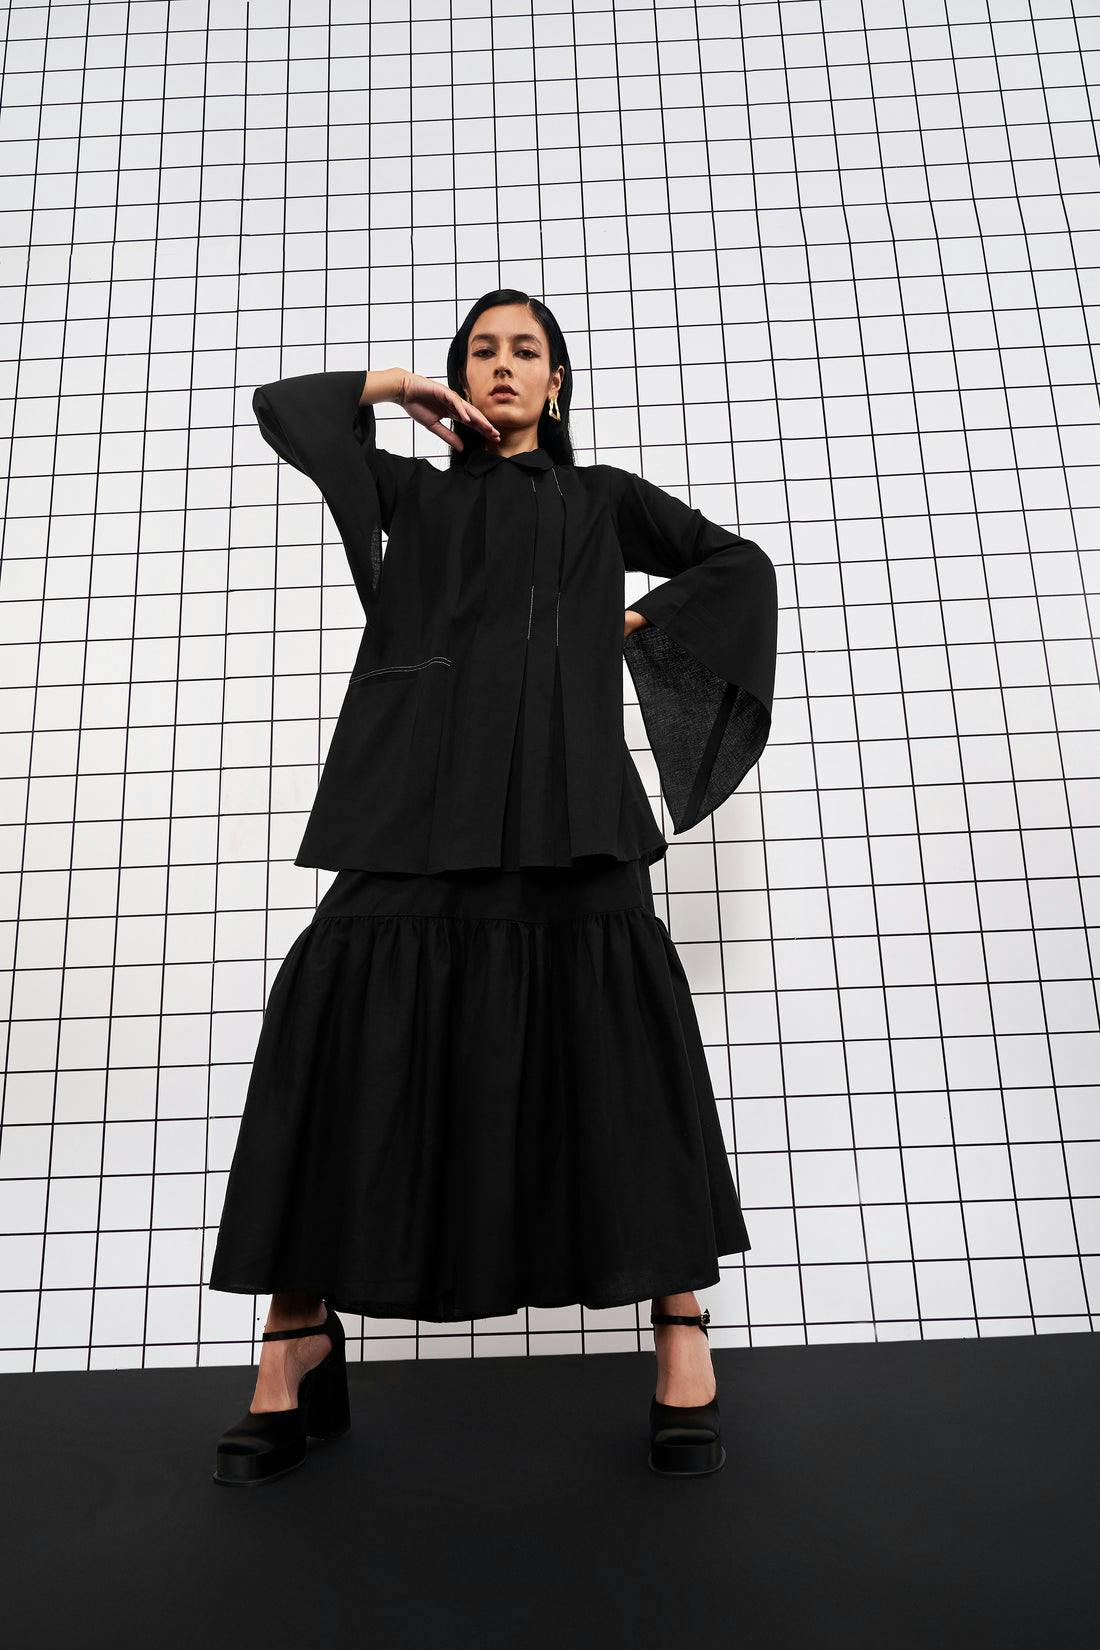 All-Black Skirt, a product by Corpora Studio